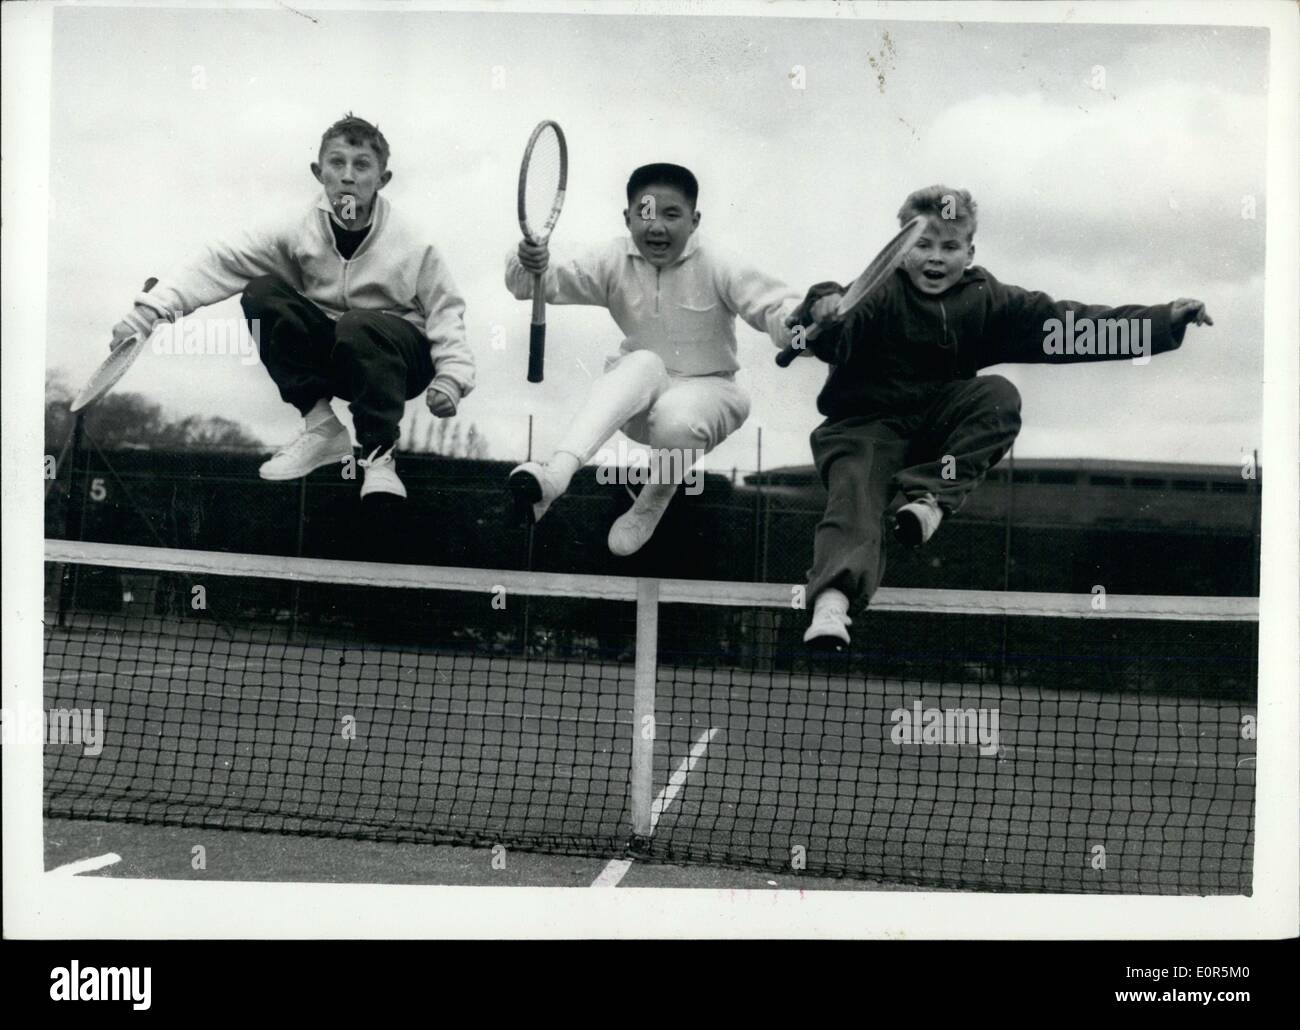 Apr. 04, 1958 - Tennis coaching for youngsters keeping warm by jumping the net: Tennis stars of the future are taking part in the Lawn Tennis association Easter Training school at Wimbledon. Photo shows Three of the youngsters jumped over the net - to keep warm - at Wimbledon this morning. They are L-R: Clive Jarrett(13) of Derby; Jerry Sung (12) of Kew and Ian Stevens (12) of Esher. Stock Photo